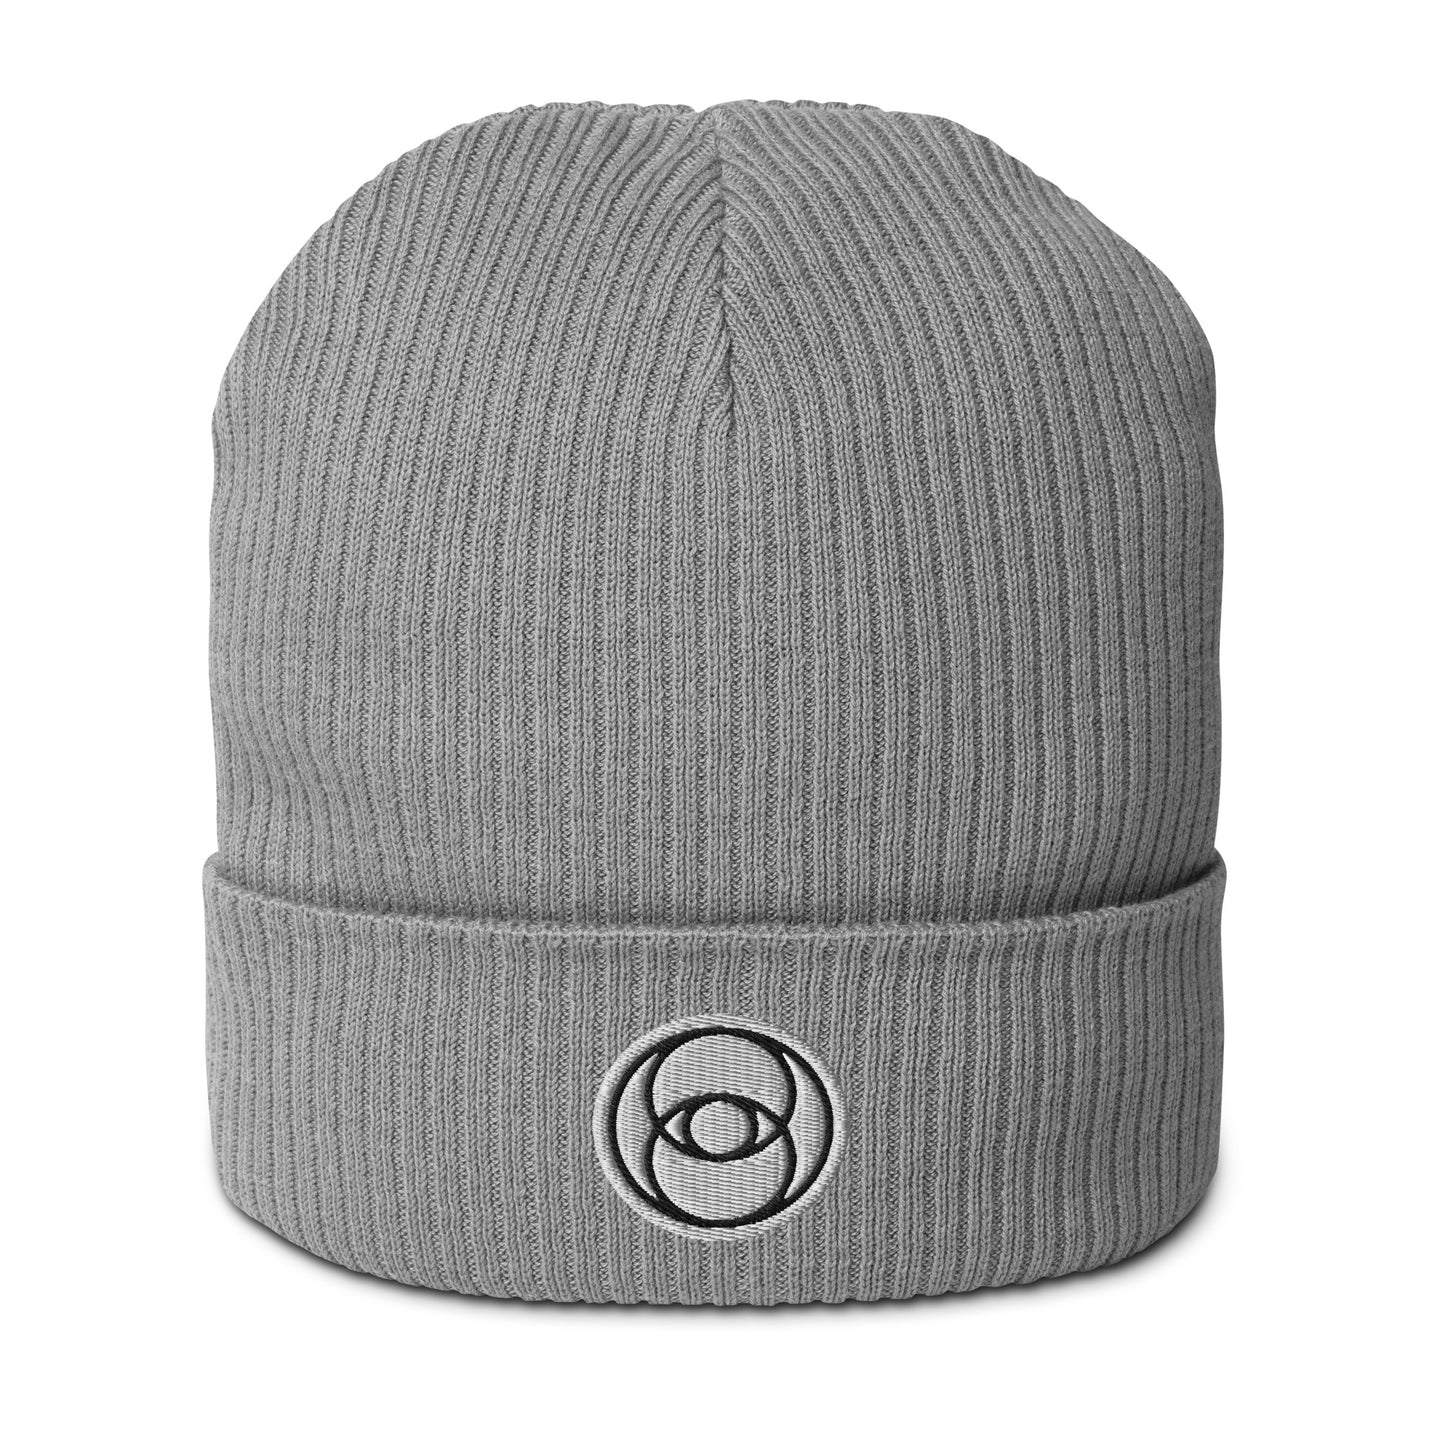 The Vesica Piscis Organic Cotton Beanie in Cloudy Gray is all about harmonious unions. Made of organic cotton and featuring a Vesica Piscis embroidery, this piece is something special. The Vesica Piscis symbolizes unity, balance, and connecting with the universe. Our beanies are made with breathable, lightweight fabric and natural materials, so you can stay comfy while you're exploring the mysteries of existence. Grab one of these beanies and add a touch of divinity to your style.